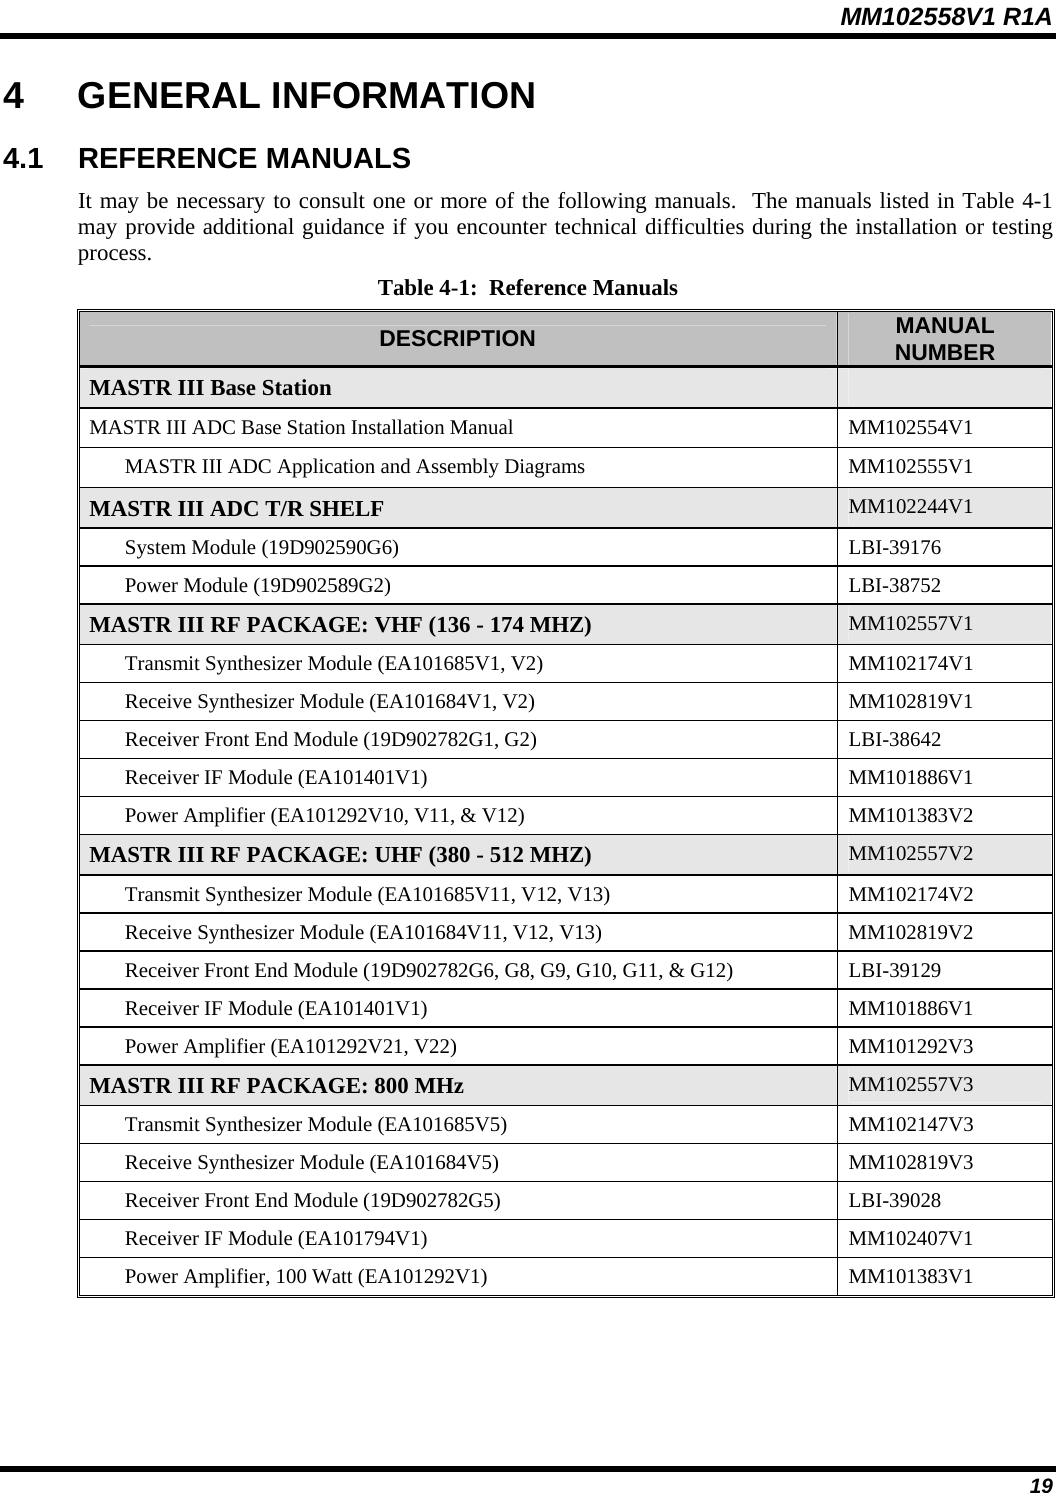 MM102558V1 R1A 4 GENERAL INFORMATION 4.1 REFERENCE MANUALS It may be necessary to consult one or more of the following manuals.  The manuals listed in Table 4-1 may provide additional guidance if you encounter technical difficulties during the installation or testing process. Table 4-1:  Reference Manuals DESCRIPTION  MANUAL NUMBER MASTR III Base Station   MASTR III ADC Base Station Installation Manual  MM102554V1   MASTR III ADC Application and Assembly Diagrams  MM102555V1 MASTR III ADC T/R SHELF  MM102244V1   System Module (19D902590G6)  LBI-39176   Power Module (19D902589G2)  LBI-38752 MASTR III RF PACKAGE: VHF (136 - 174 MHZ)  MM102557V1   Transmit Synthesizer Module (EA101685V1, V2)  MM102174V1   Receive Synthesizer Module (EA101684V1, V2) MM102819V1   Receiver Front End Module (19D902782G1, G2) LBI-38642   Receiver IF Module (EA101401V1)  MM101886V1   Power Amplifier (EA101292V10, V11, &amp; V12)  MM101383V2 MASTR III RF PACKAGE: UHF (380 - 512 MHZ)  MM102557V2   Transmit Synthesizer Module (EA101685V11, V12, V13)  MM102174V2   Receive Synthesizer Module (EA101684V11, V12, V13) MM102819V2   Receiver Front End Module (19D902782G6, G8, G9, G10, G11, &amp; G12)  LBI-39129   Receiver IF Module (EA101401V1)  MM101886V1   Power Amplifier (EA101292V21, V22)  MM101292V3 MASTR III RF PACKAGE: 800 MHz  MM102557V3   Transmit Synthesizer Module (EA101685V5)  MM102147V3   Receive Synthesizer Module (EA101684V5) MM102819V3   Receiver Front End Module (19D902782G5) LBI-39028   Receiver IF Module (EA101794V1)  MM102407V1   Power Amplifier, 100 Watt (EA101292V1)  MM101383V1  19 